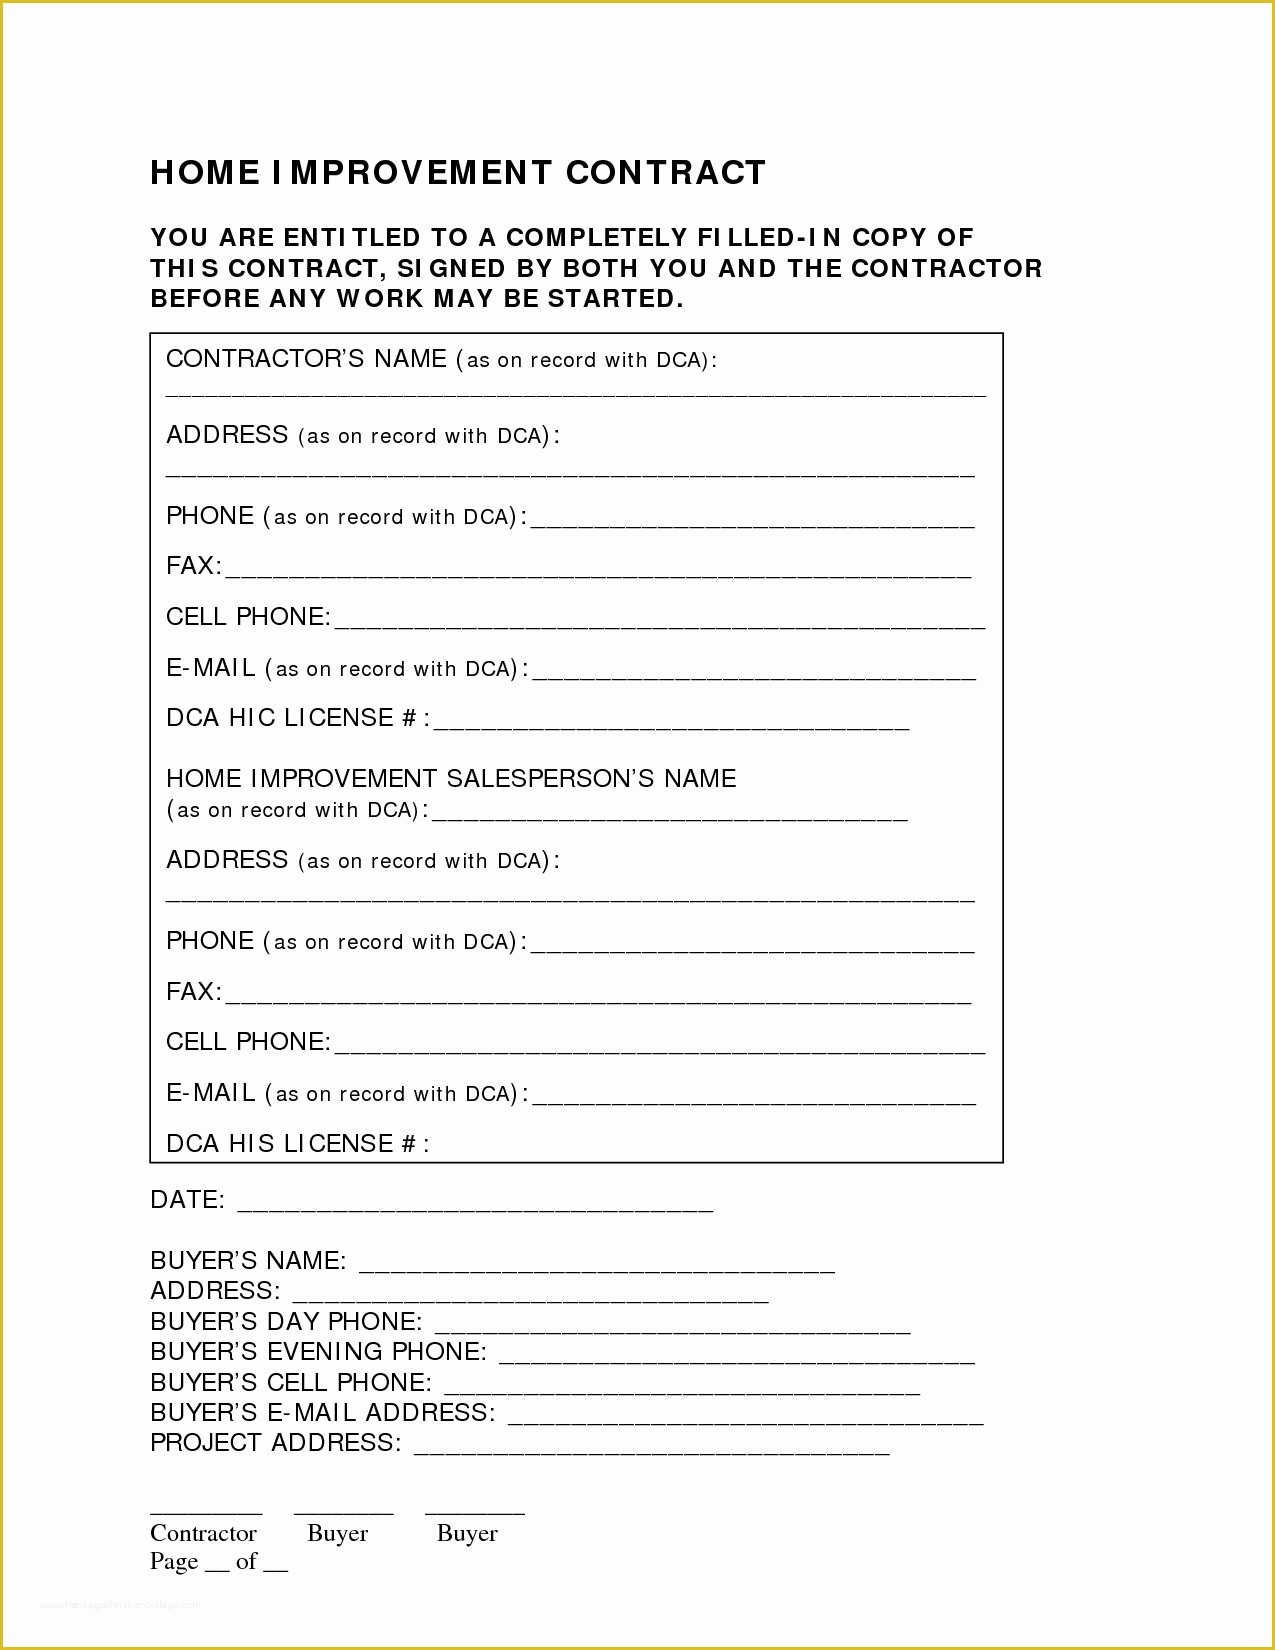 Free Renovation Contract Template Of Home Improvement Contract Free Printable Documents